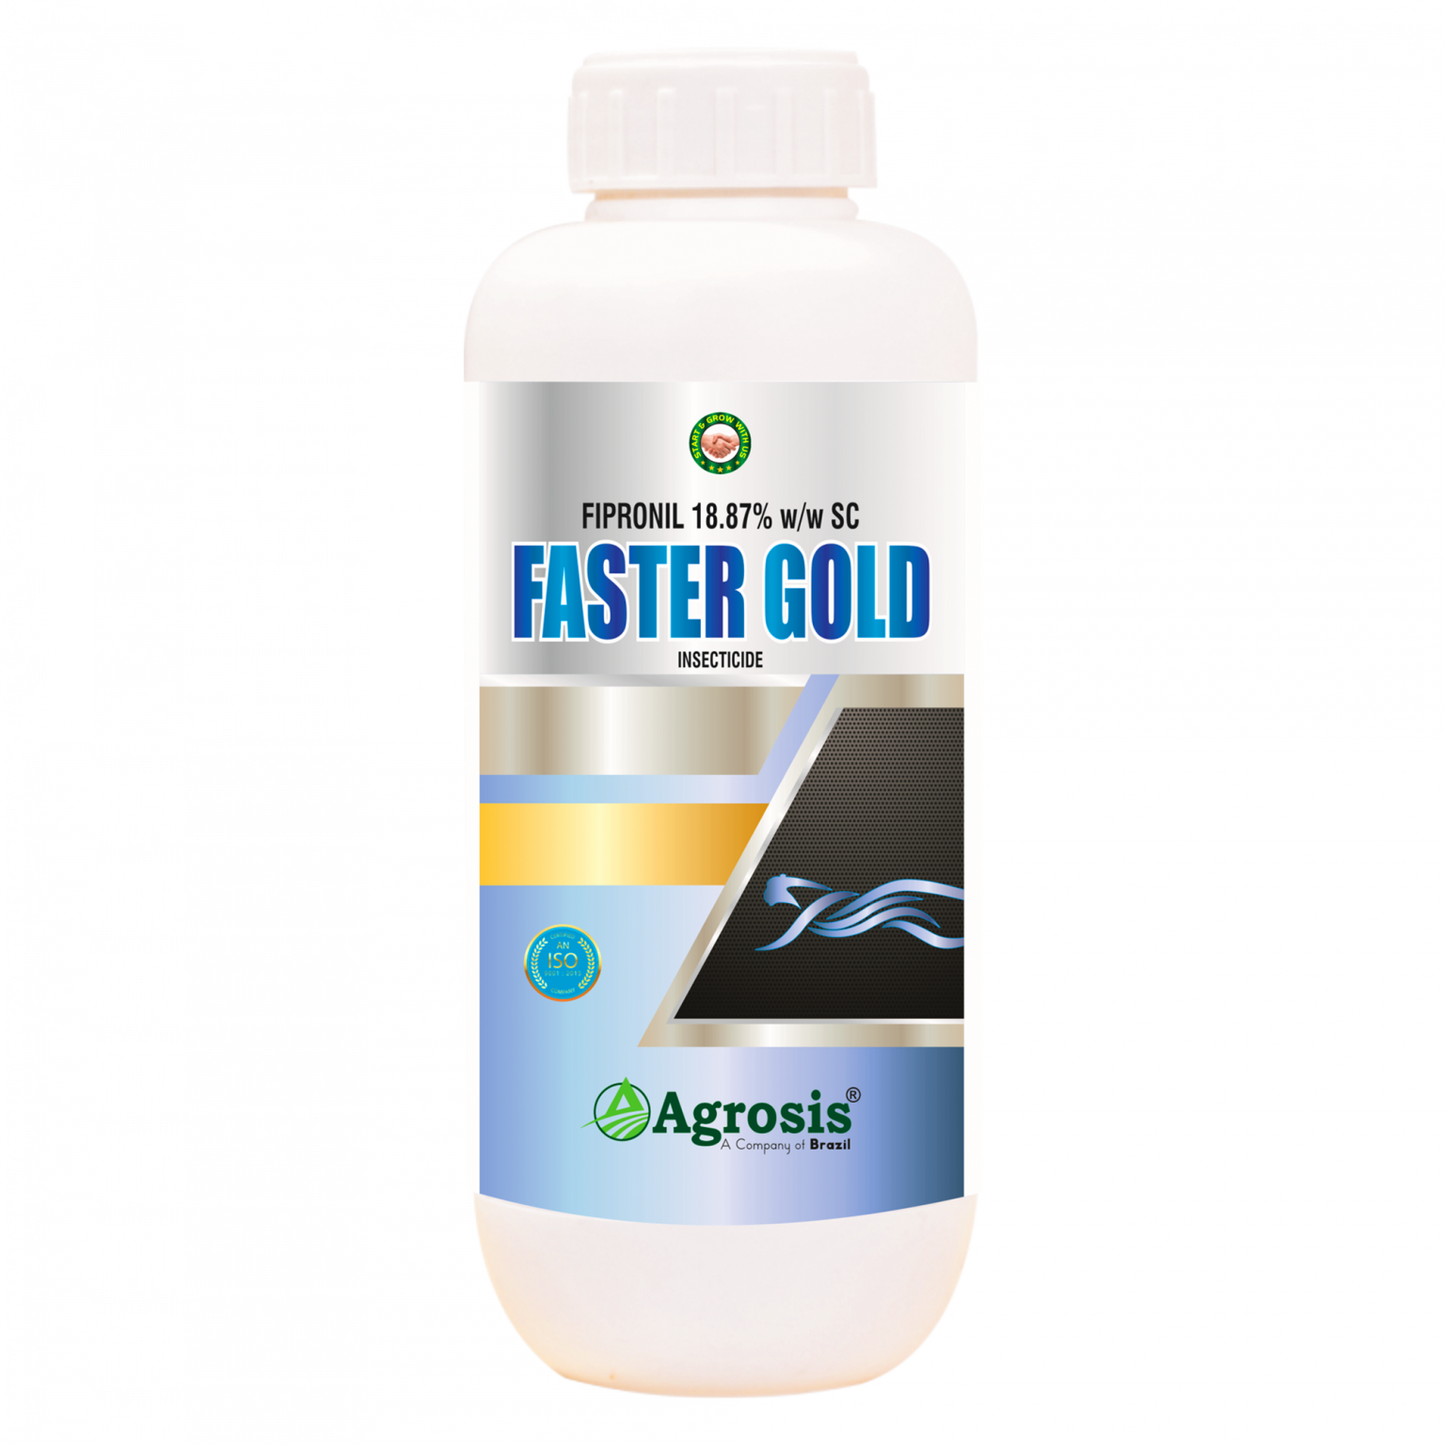 Faster Gold - Fipronil 18.87% SC Insecticide